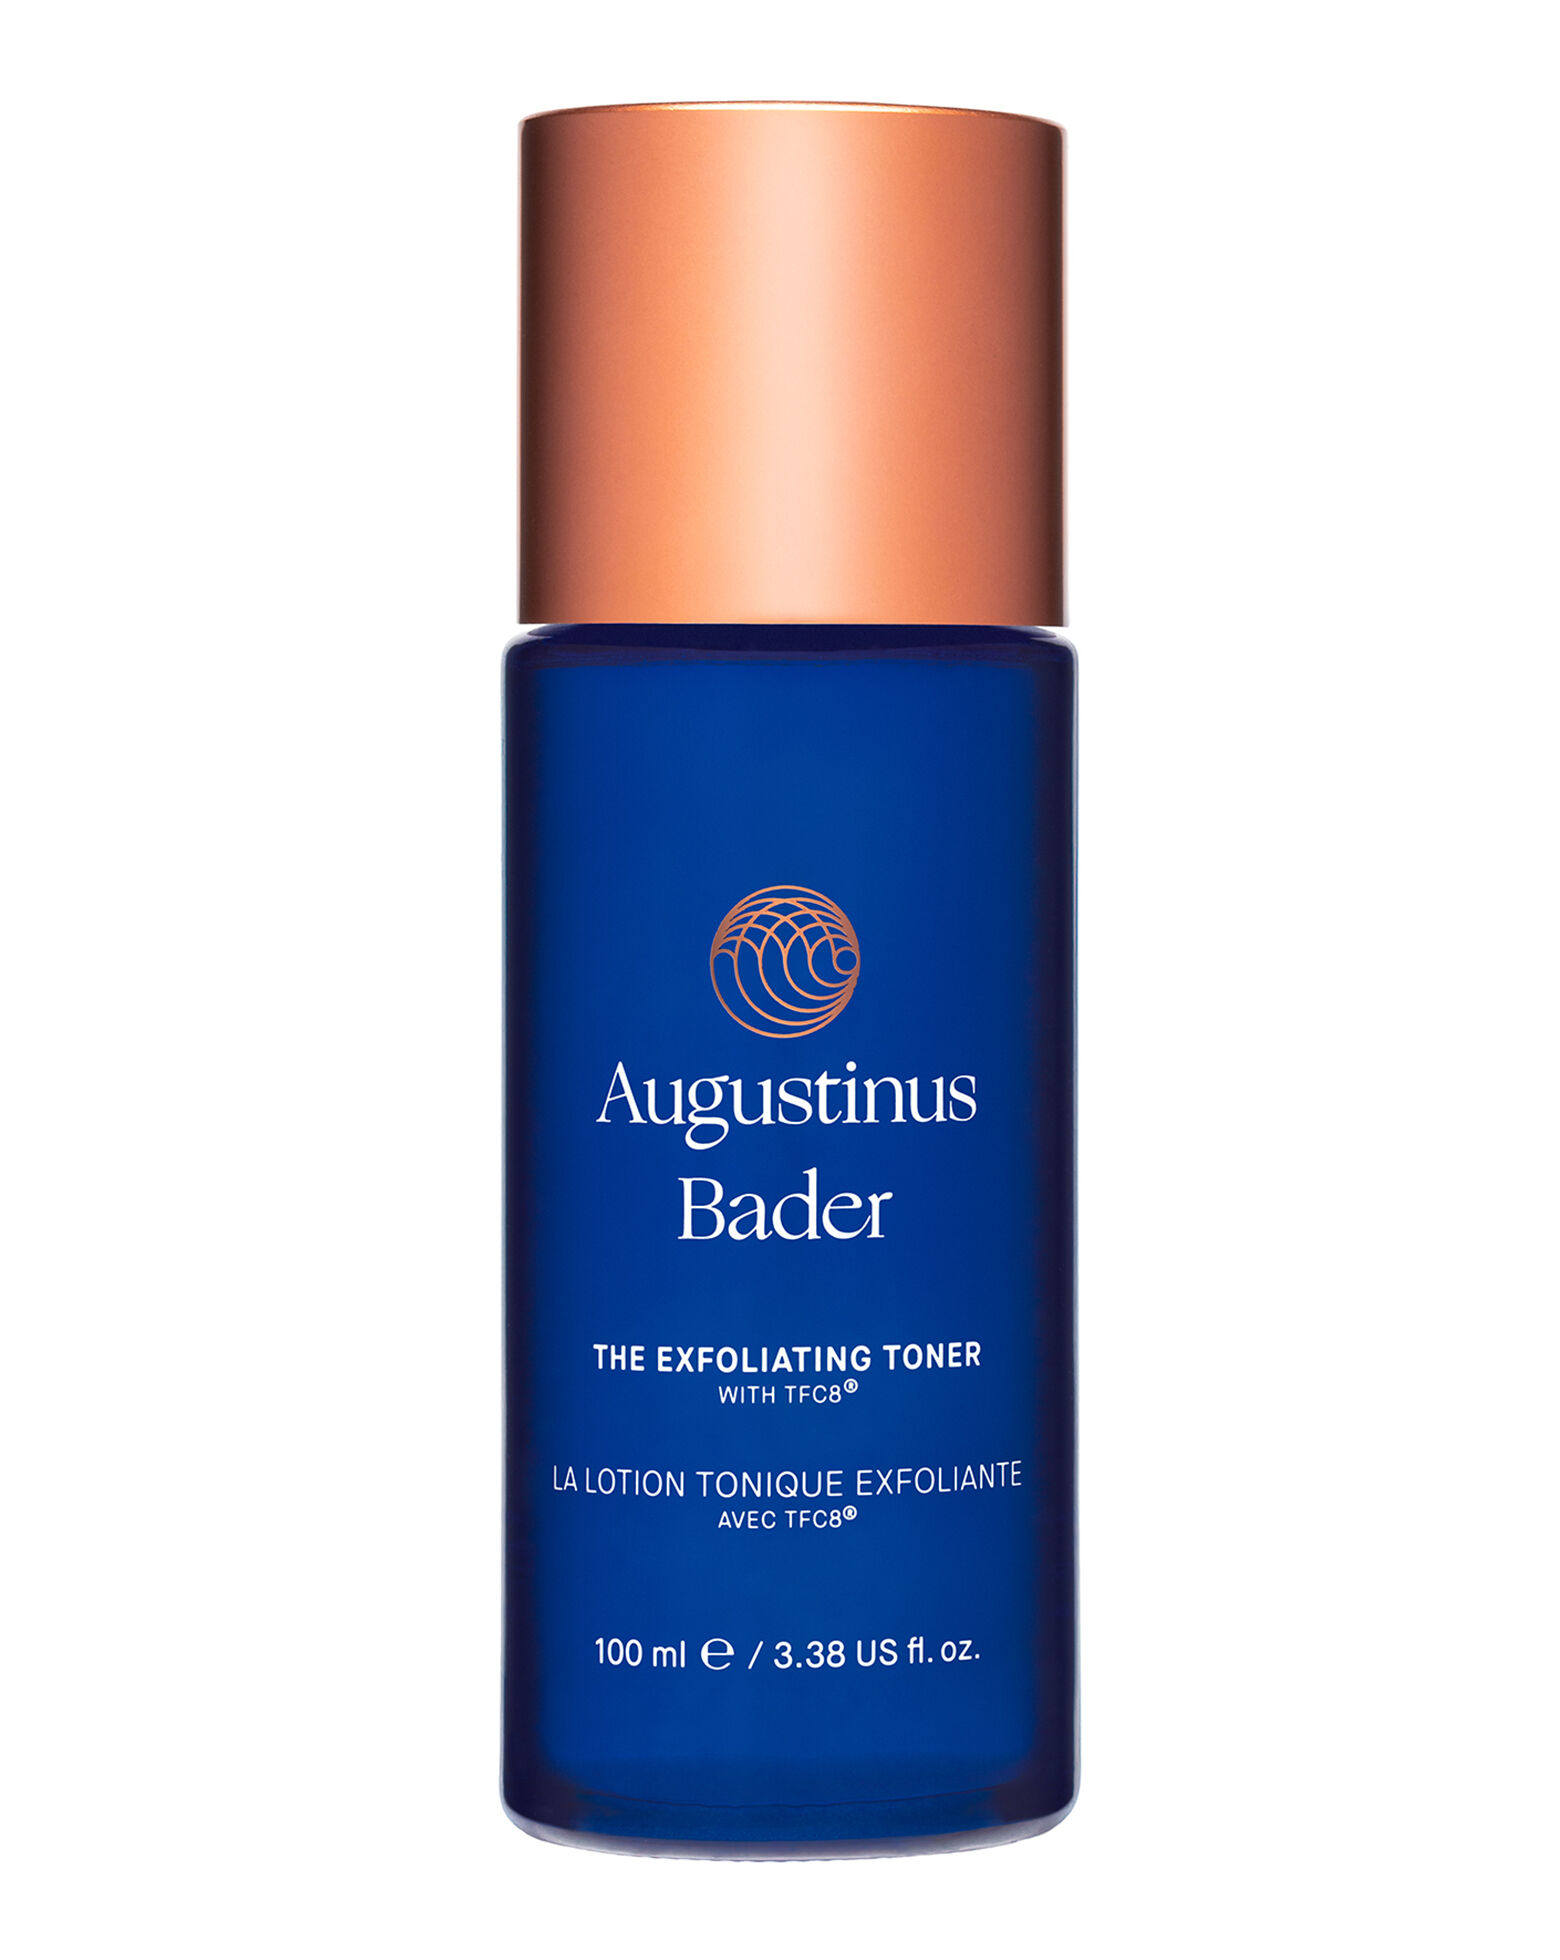 Augustinus Bader - The Exfoliating Toner Essence with TFC8